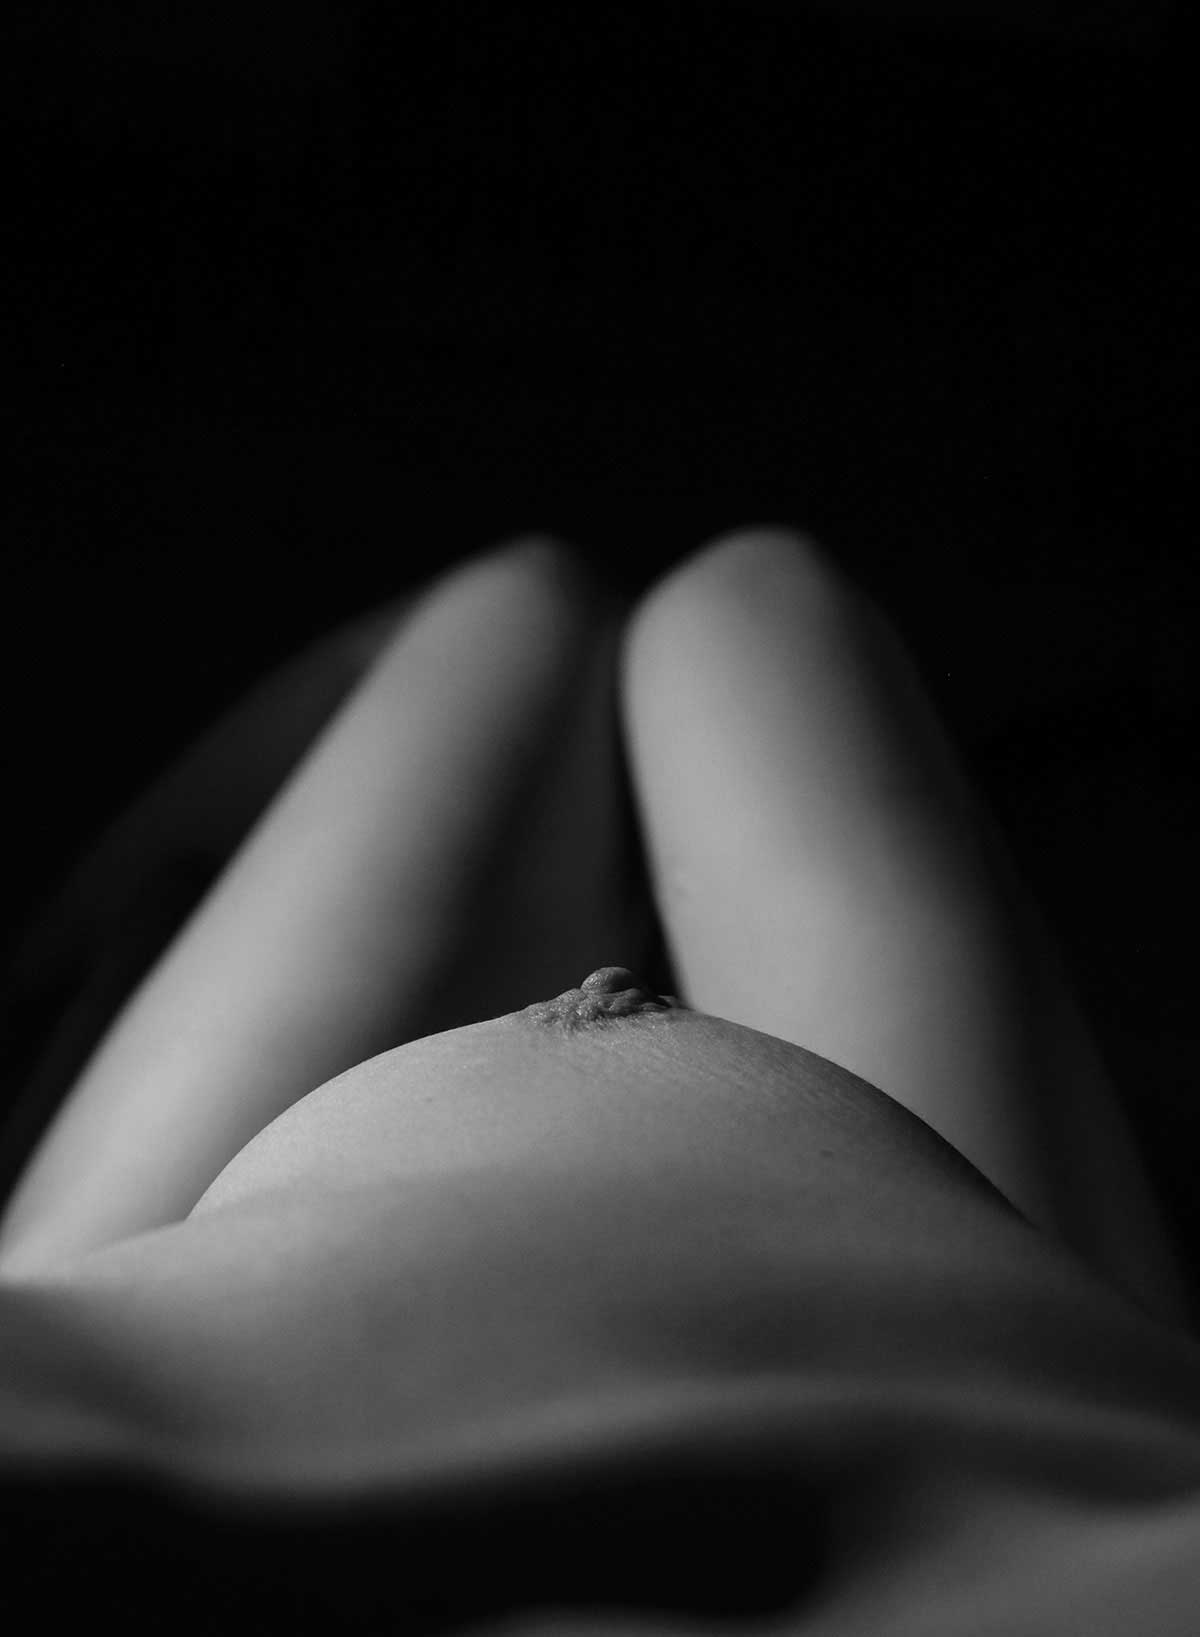 Professional Porn Photography - Lucie Nechanicka ; Nude photography | Dodho